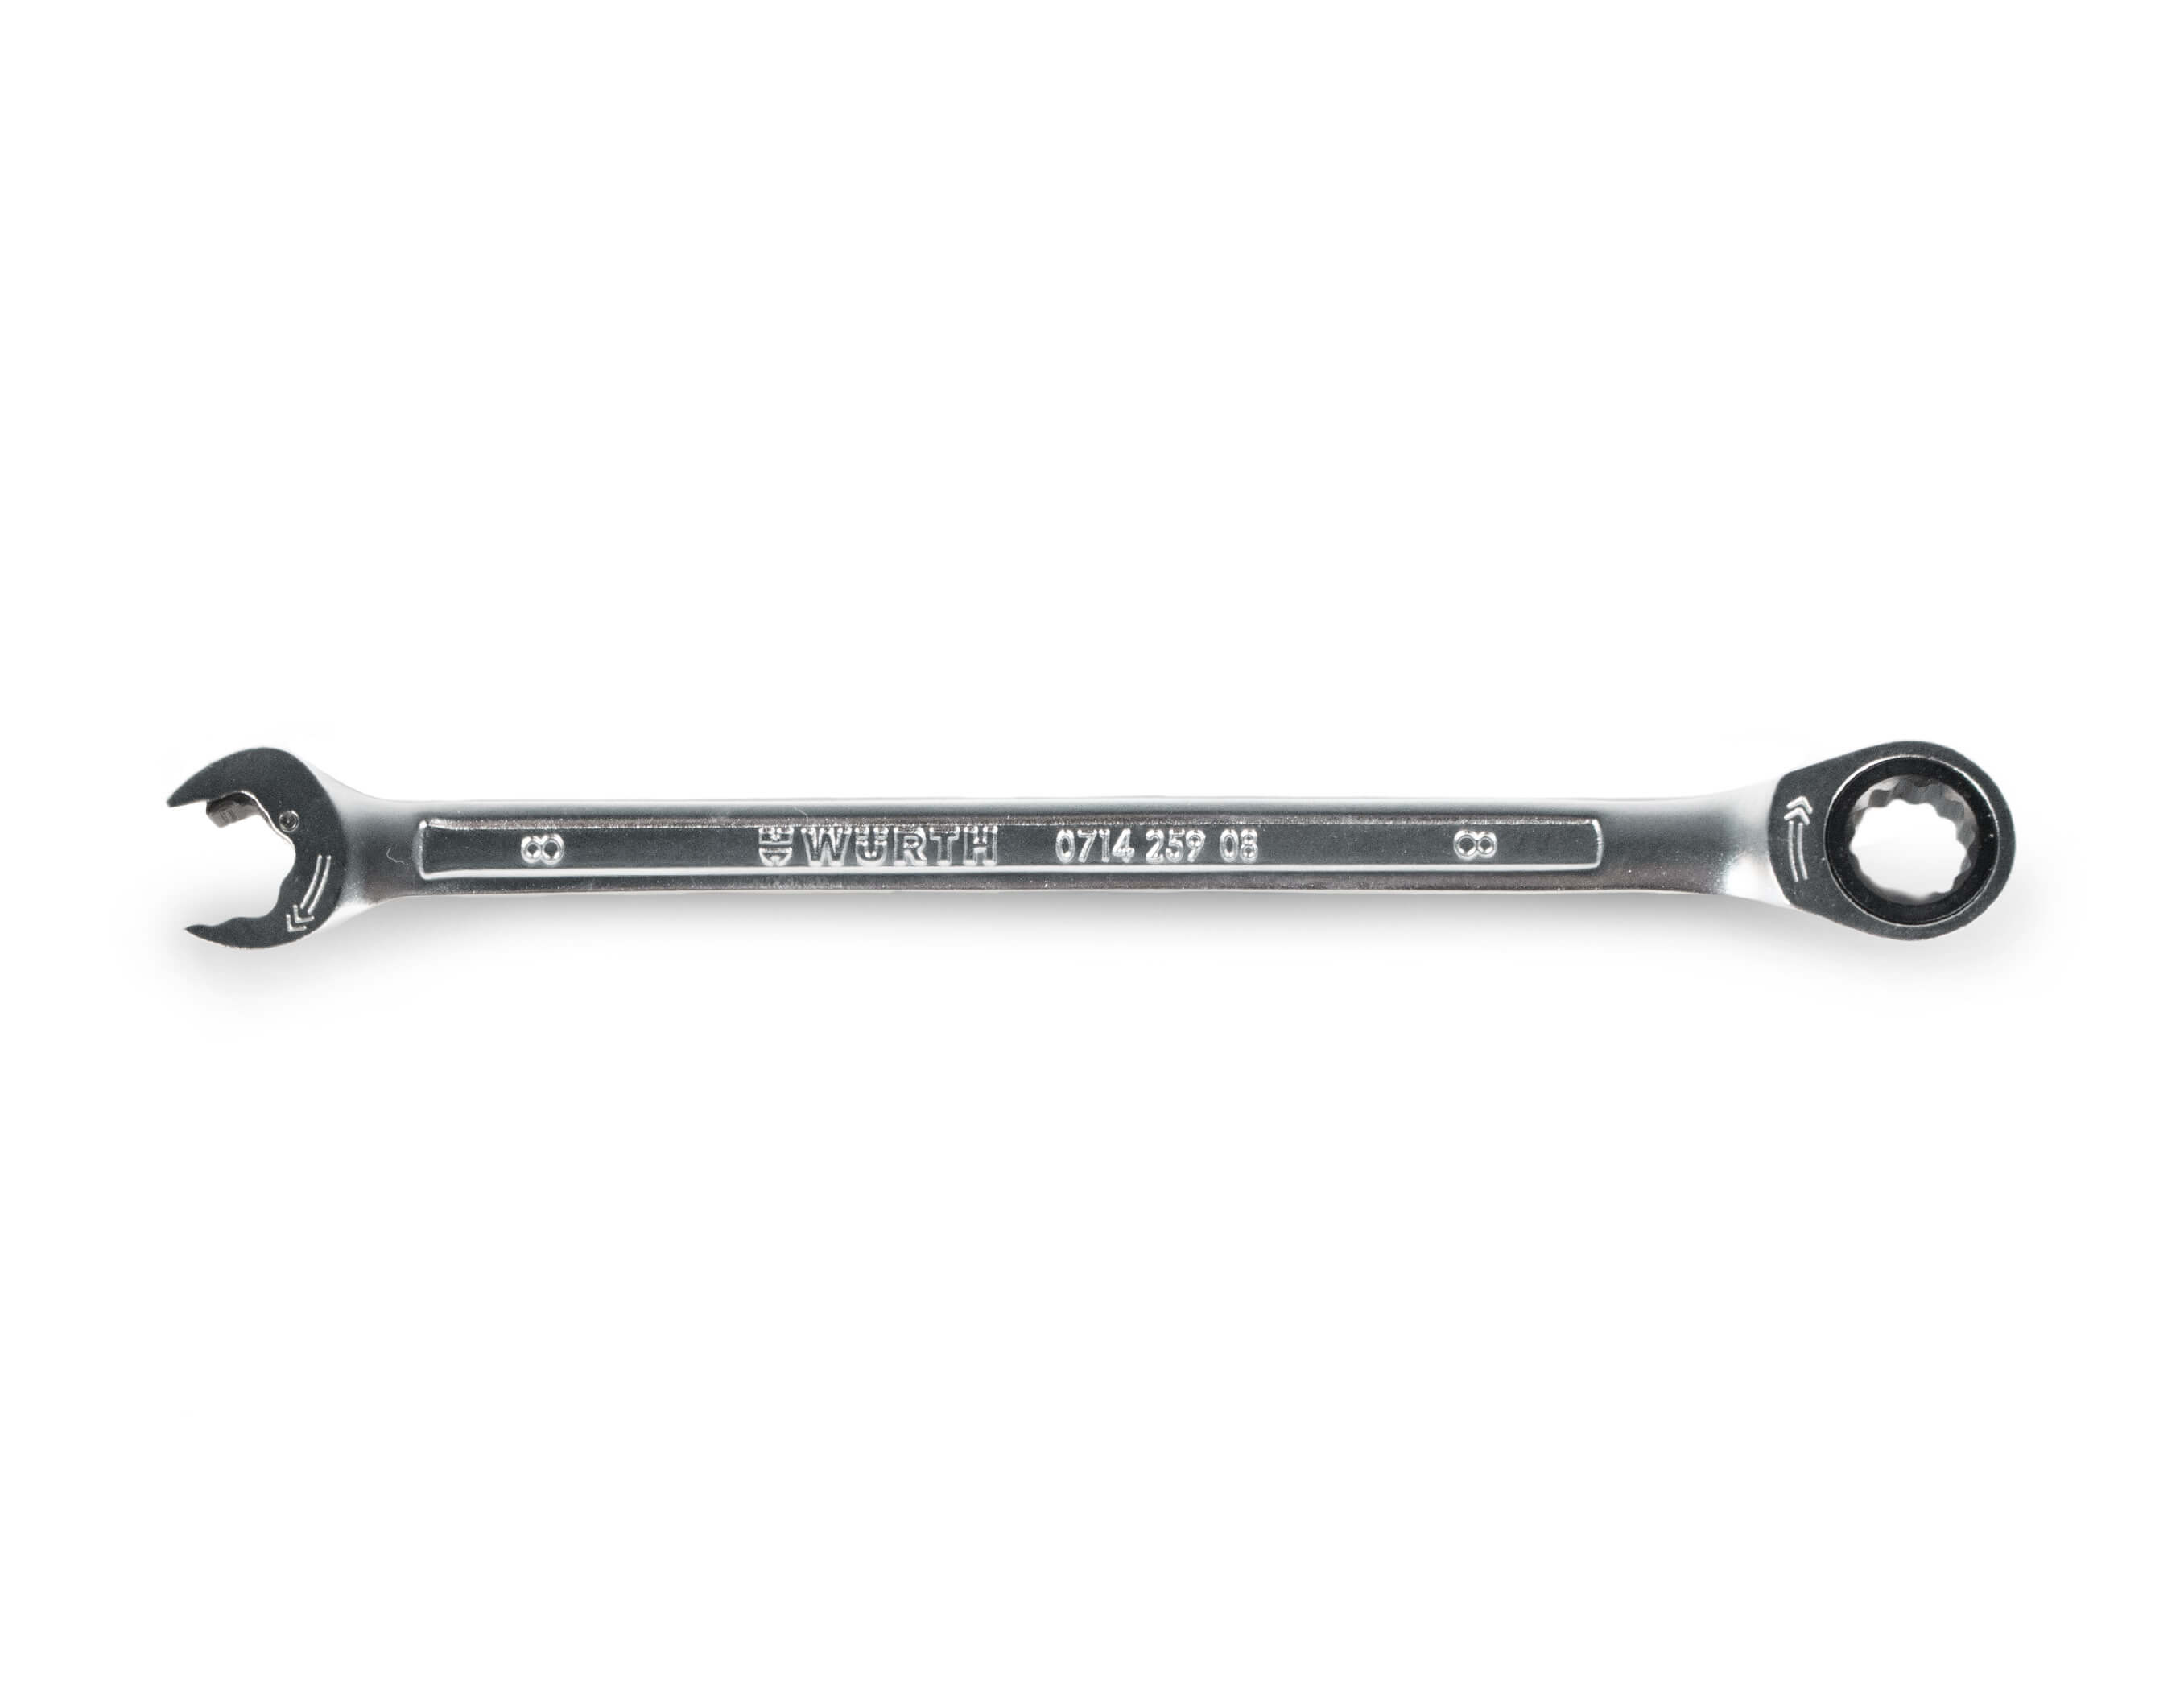 Ratchet combination wrench both sides 8MM